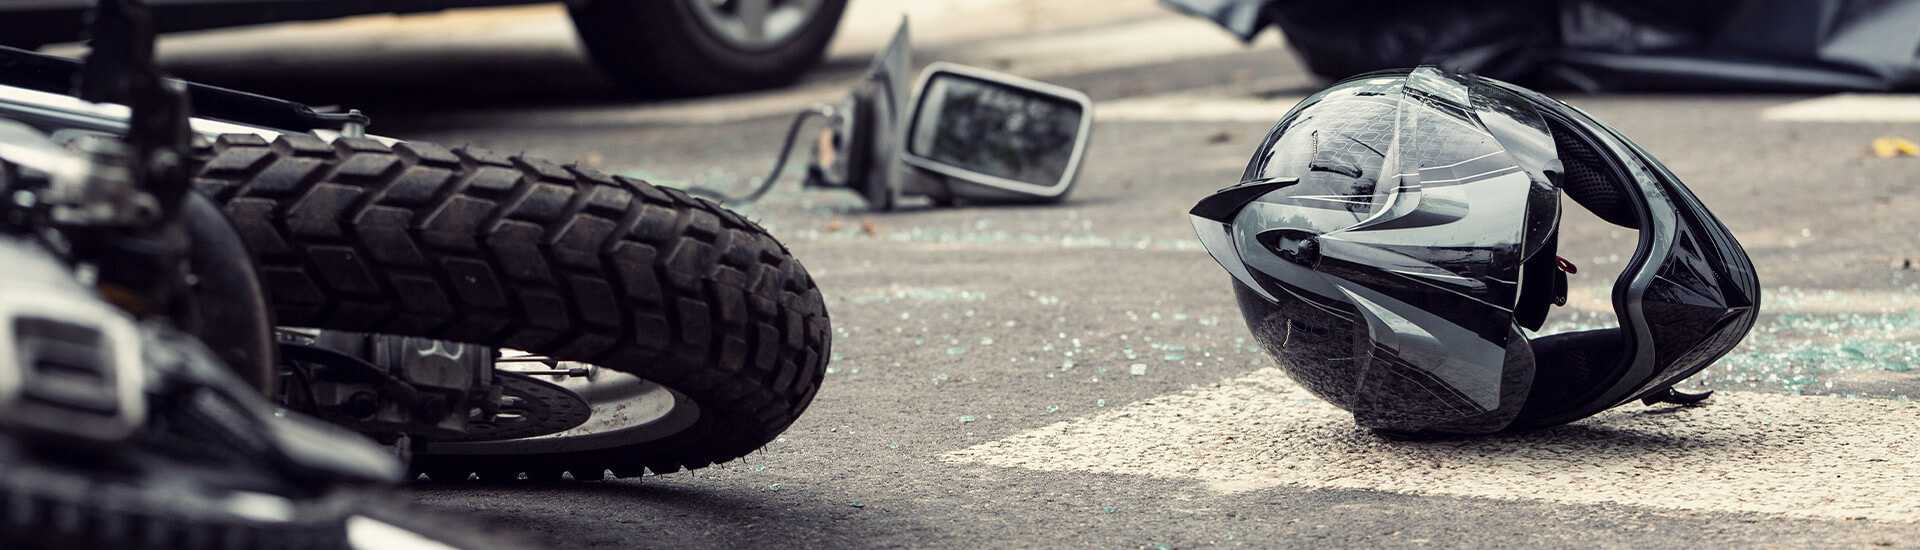 Photo of a motorcycle accident and empty helmet on the pavement